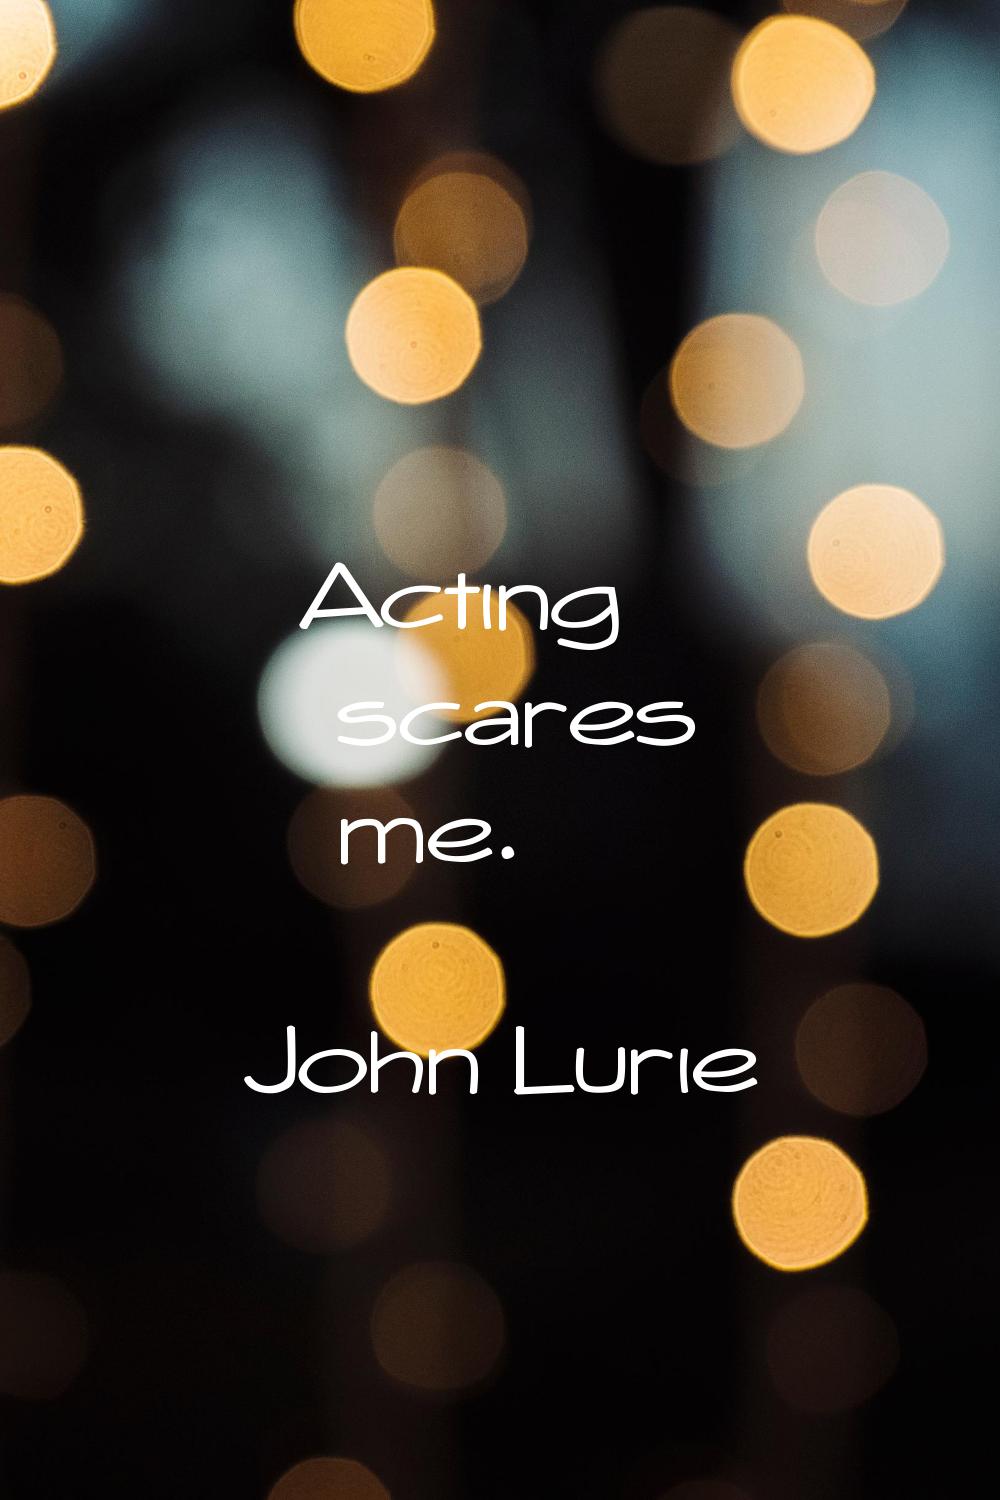 Acting scares me.